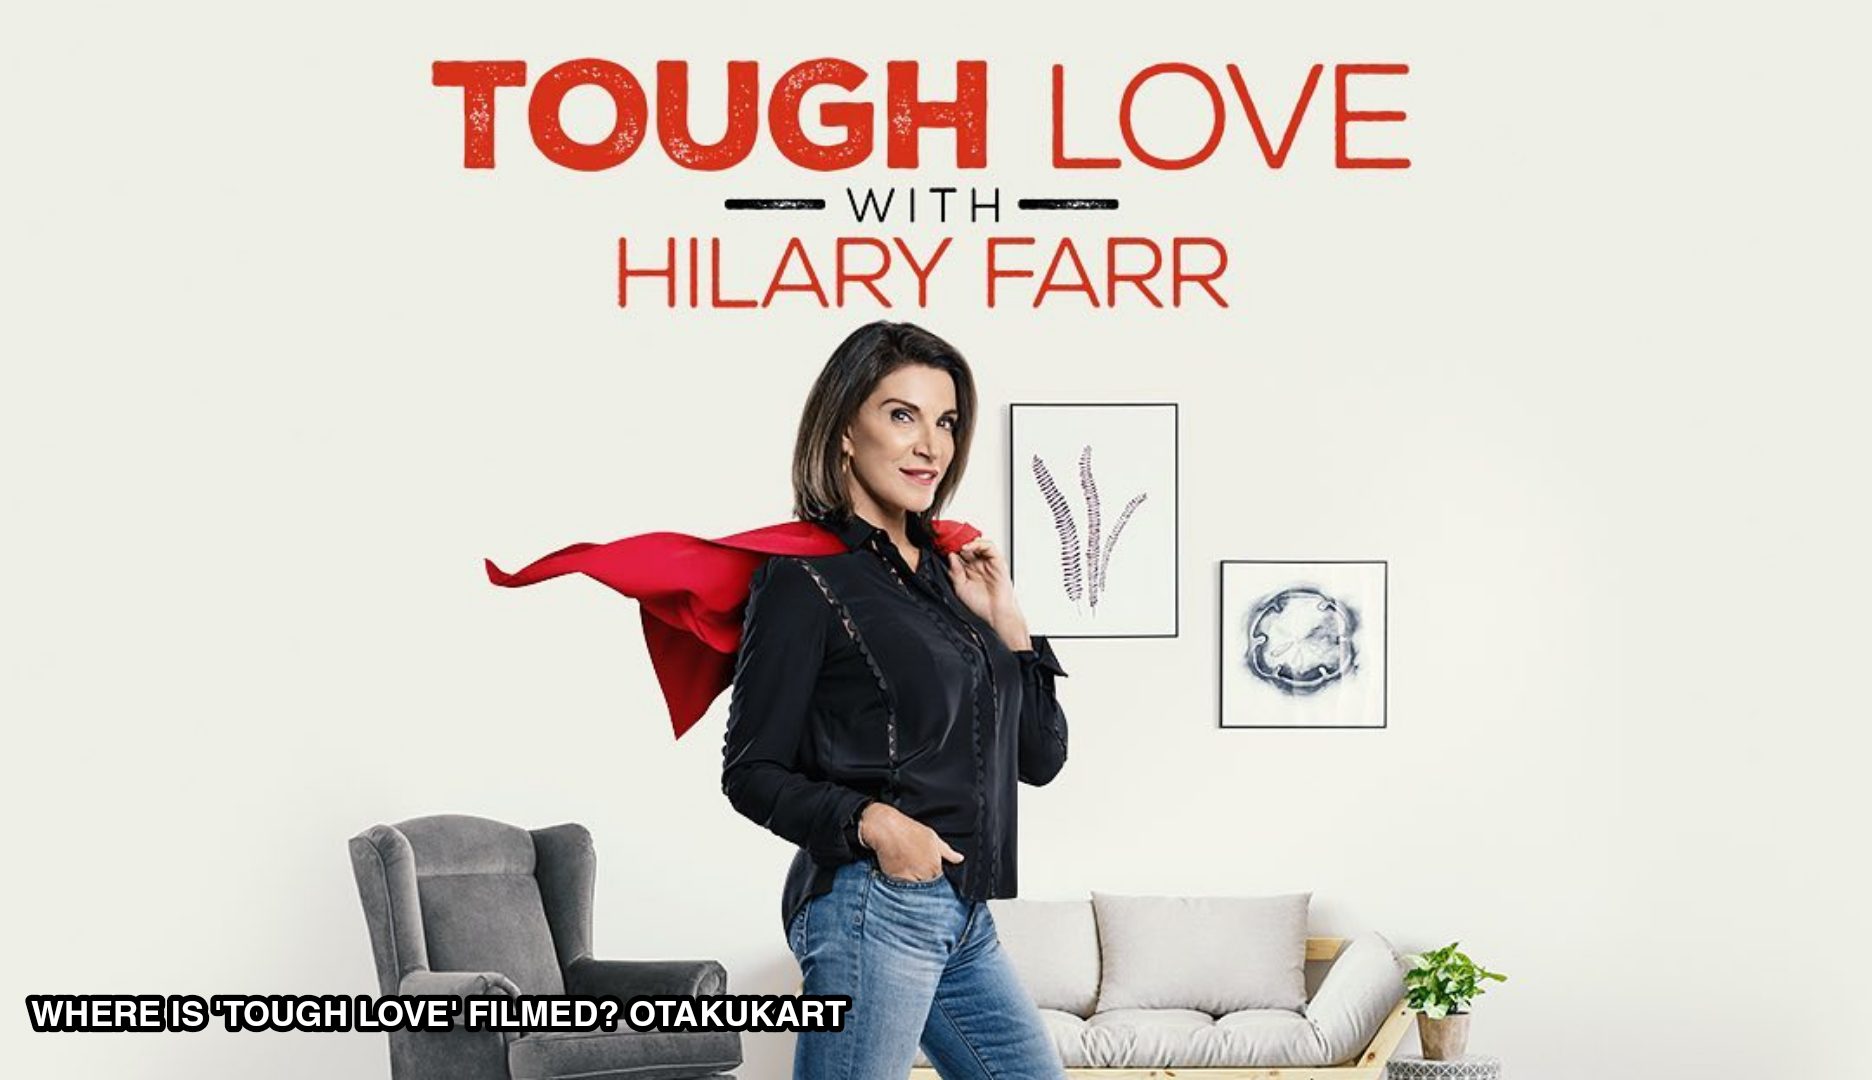 About Hilary Farr